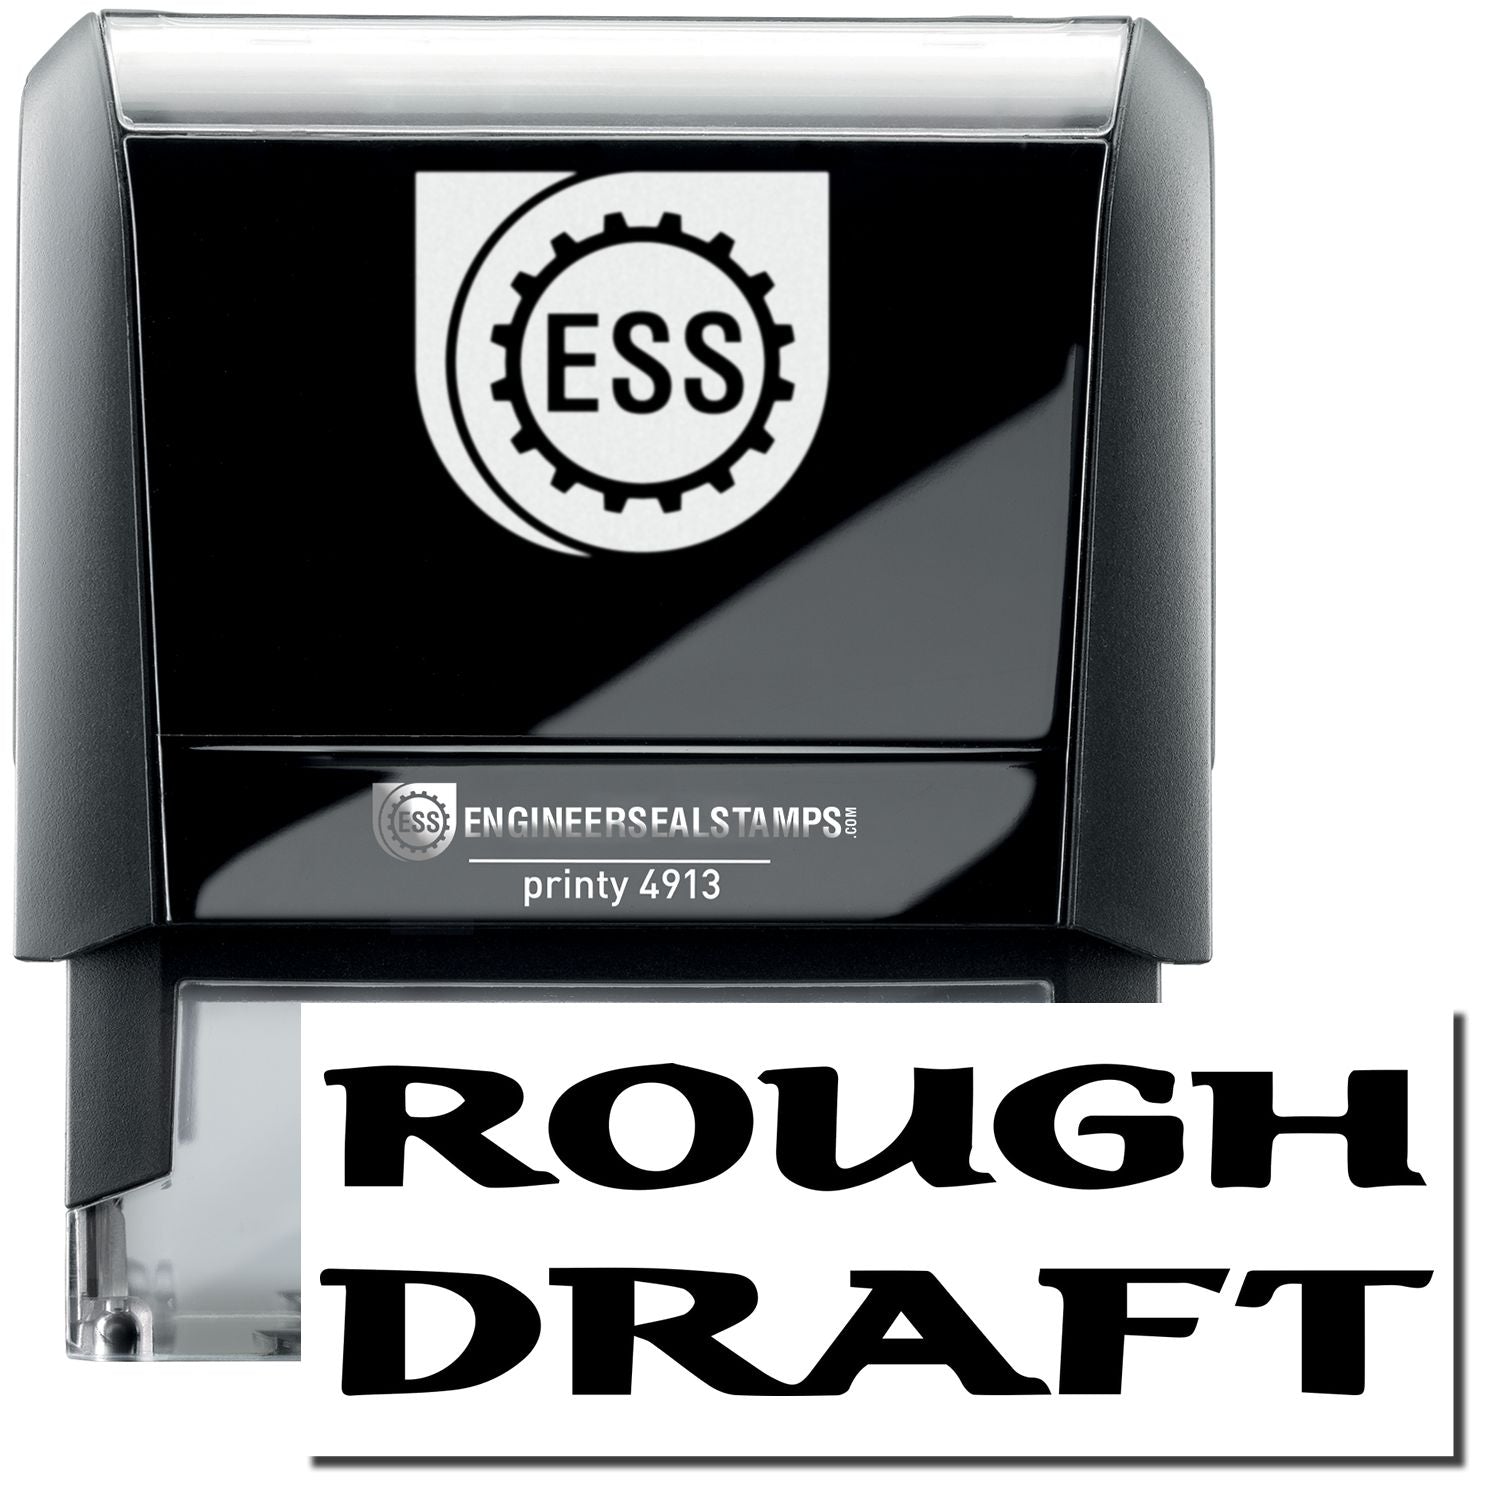 A self-inking stamp with a stamped image showing how the text "ROUGH DRAFT" in a large bold font is displayed by it after stamping.